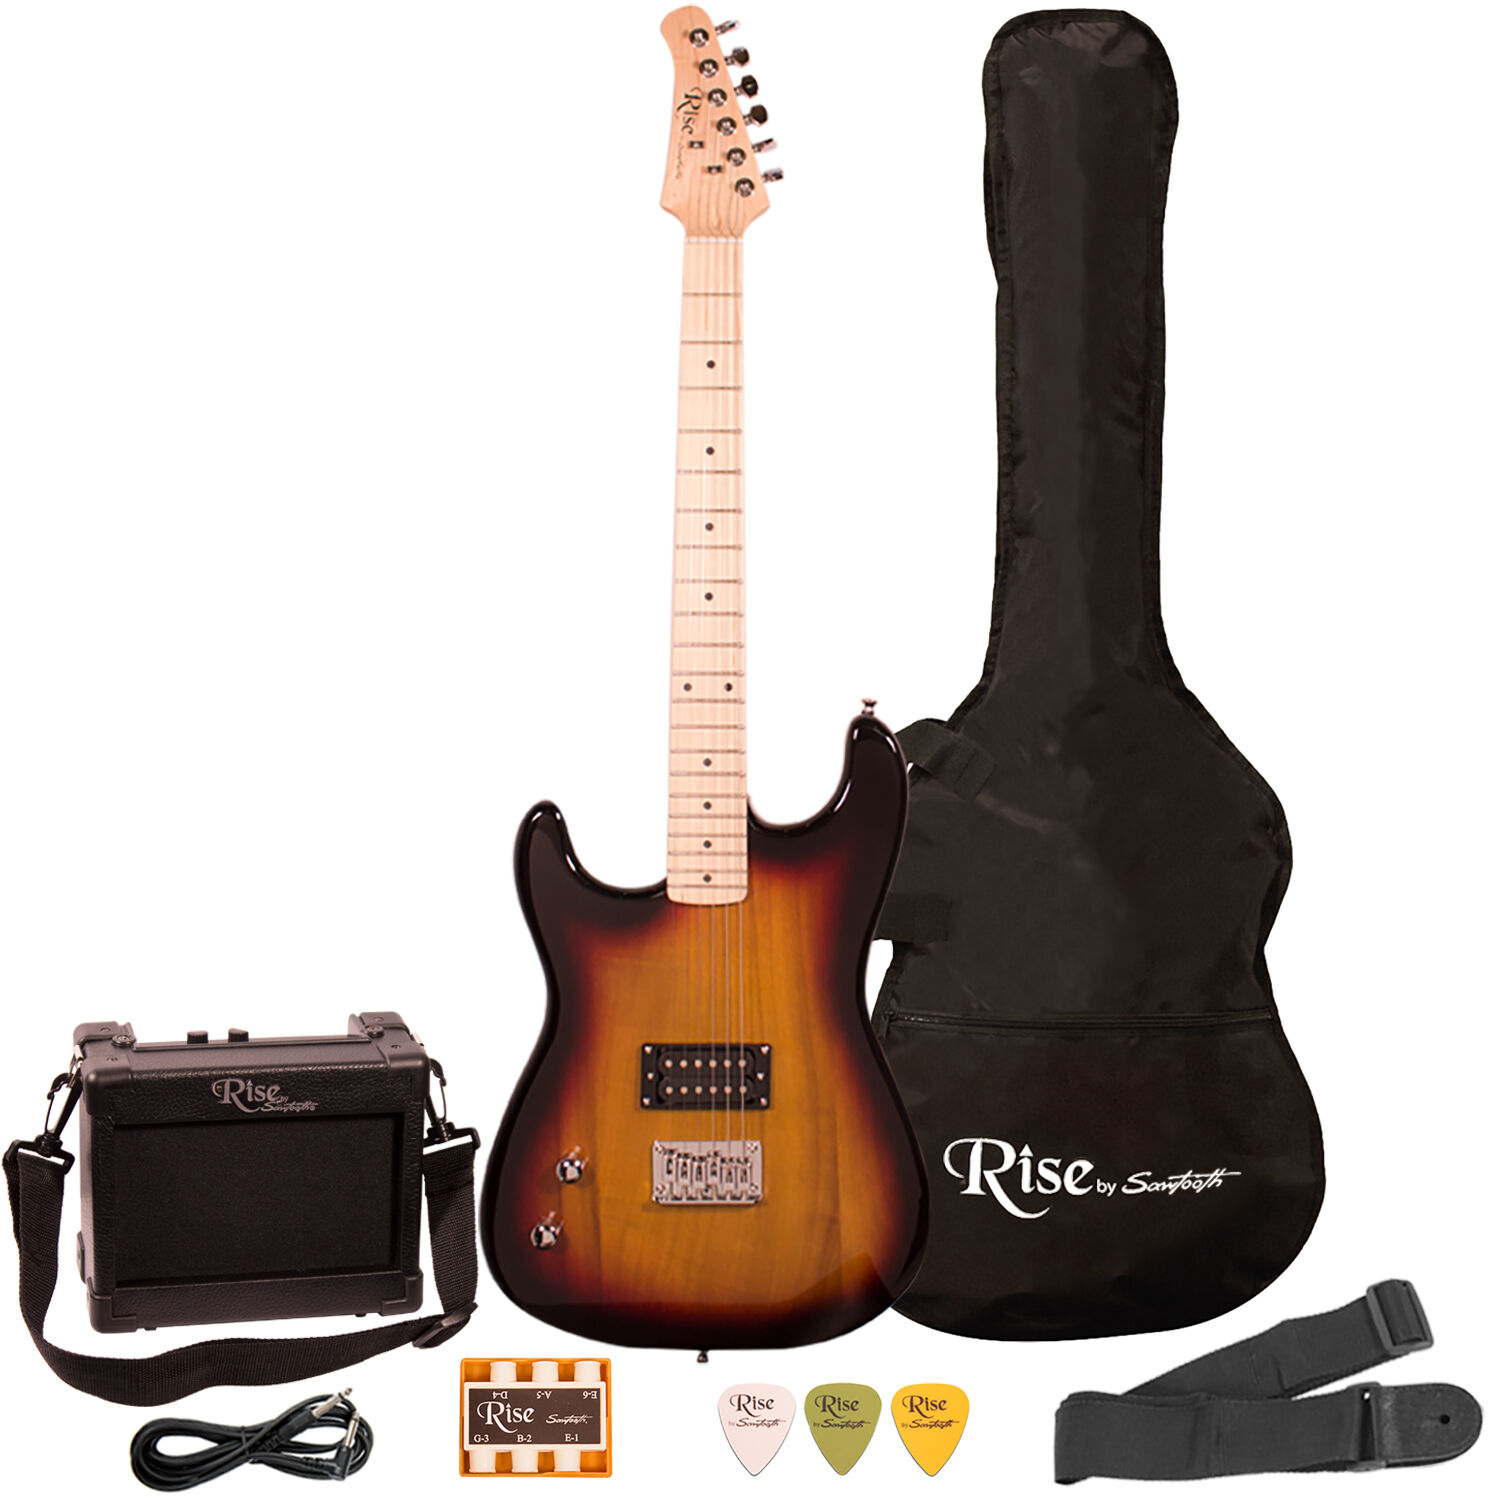 Model:Left Handed Full Size Guitar, Sunburst:Rise by Sawtooth Beginner Electric Guitar Kit with Amp & Accessories